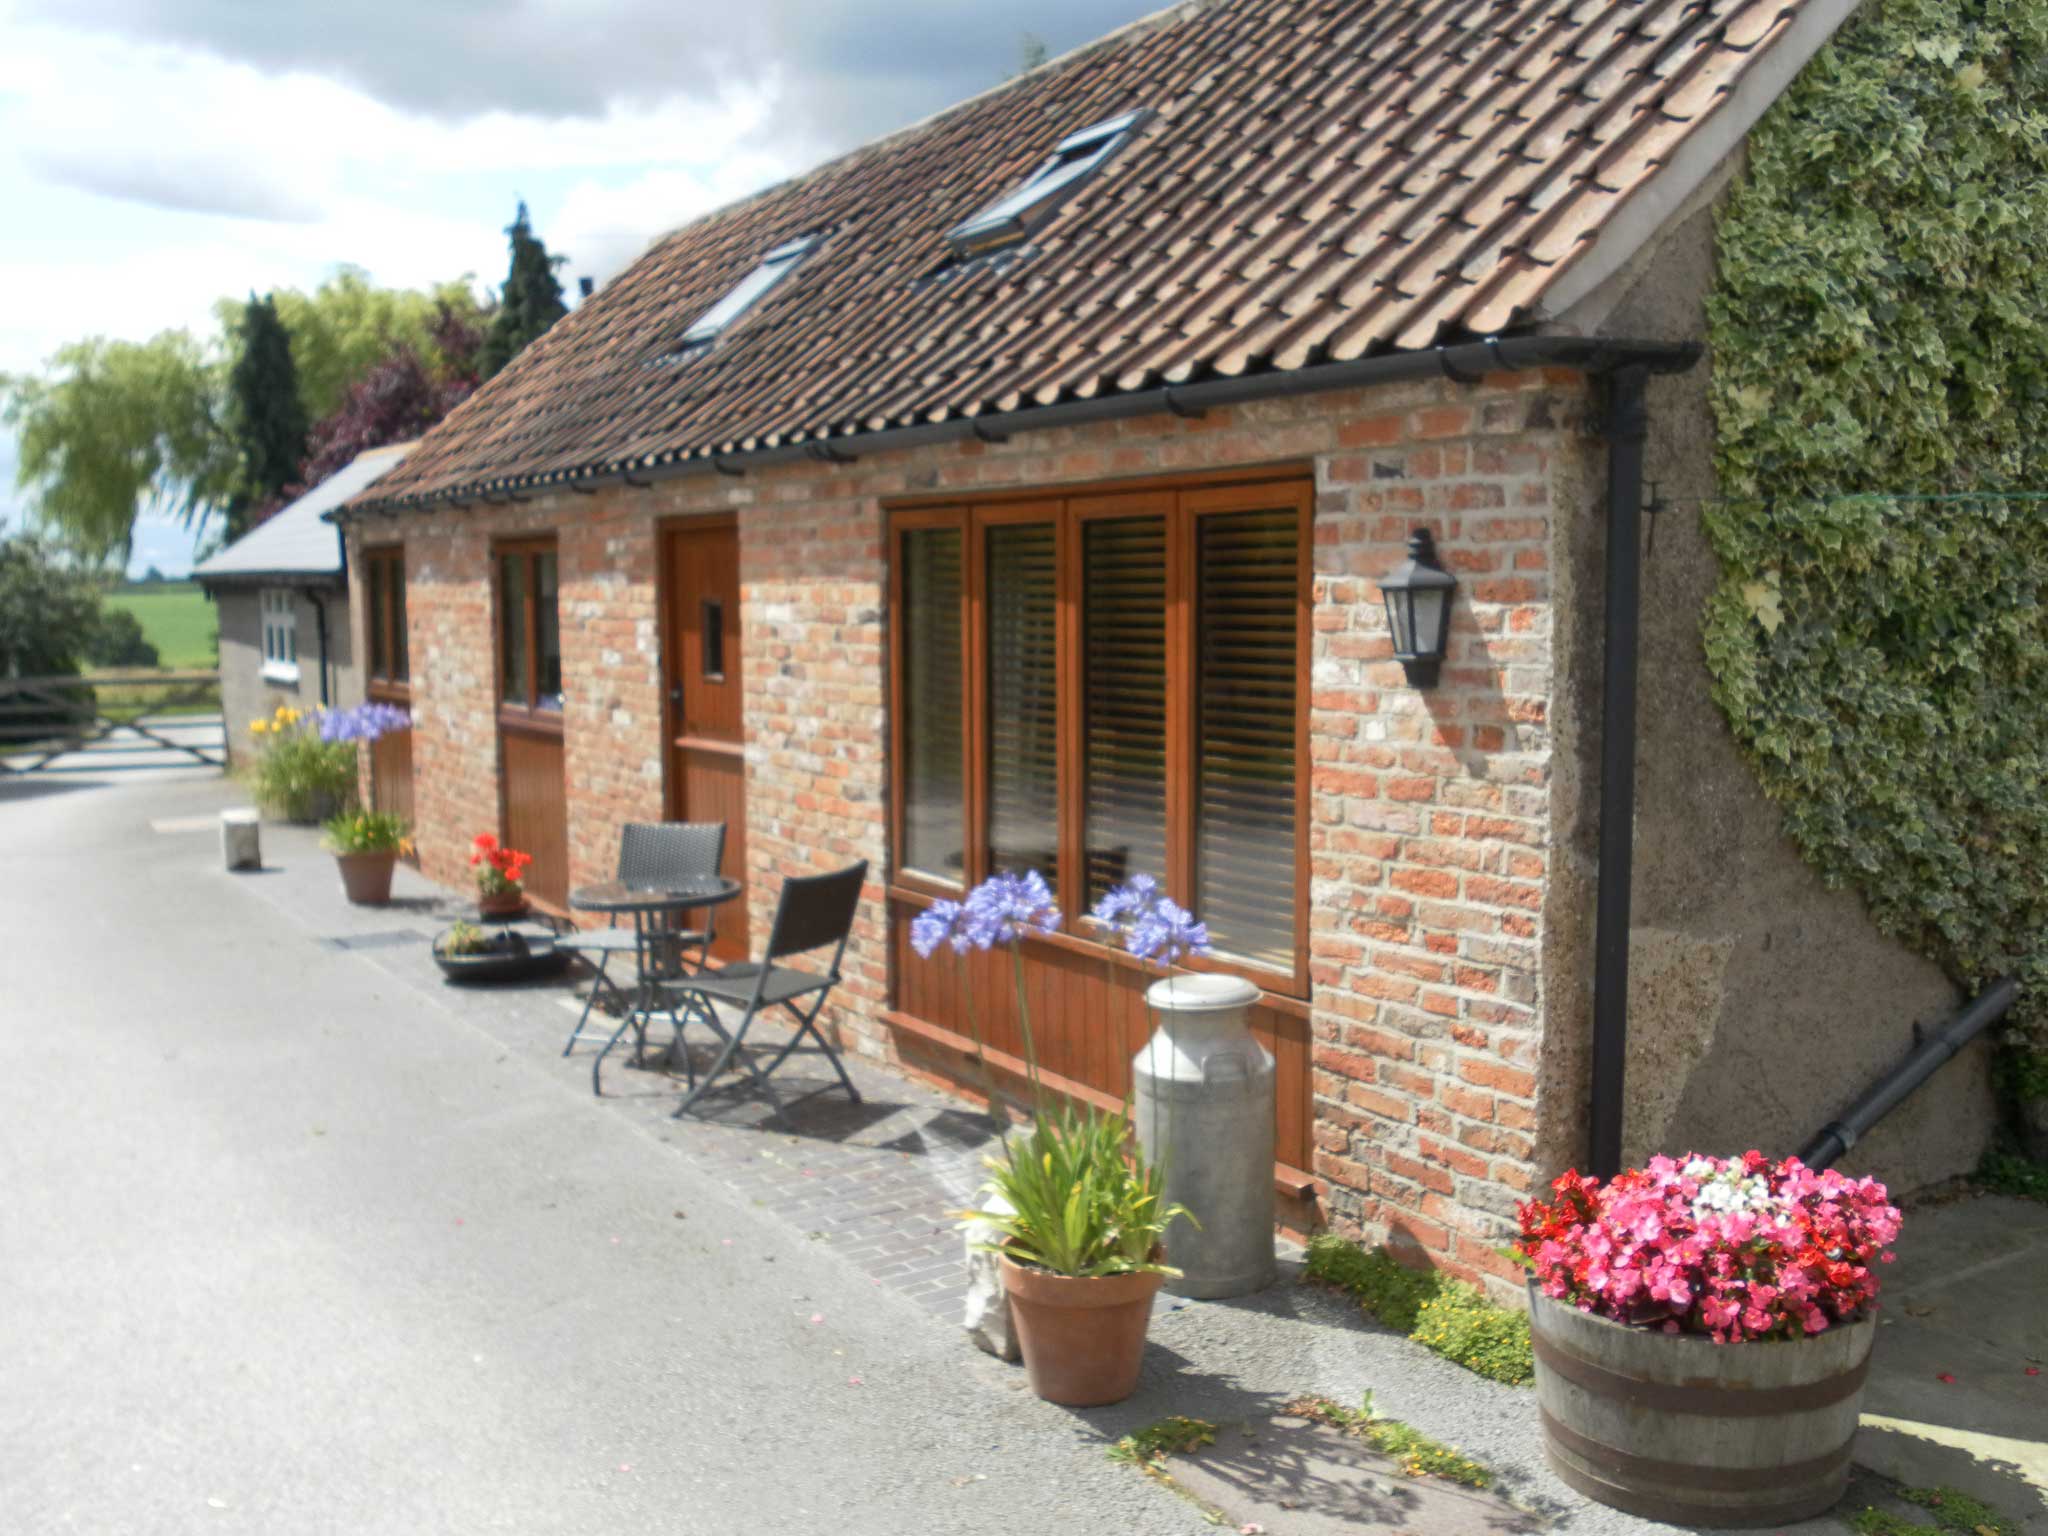 self catering holiday accommodation in North Nottinghamshire